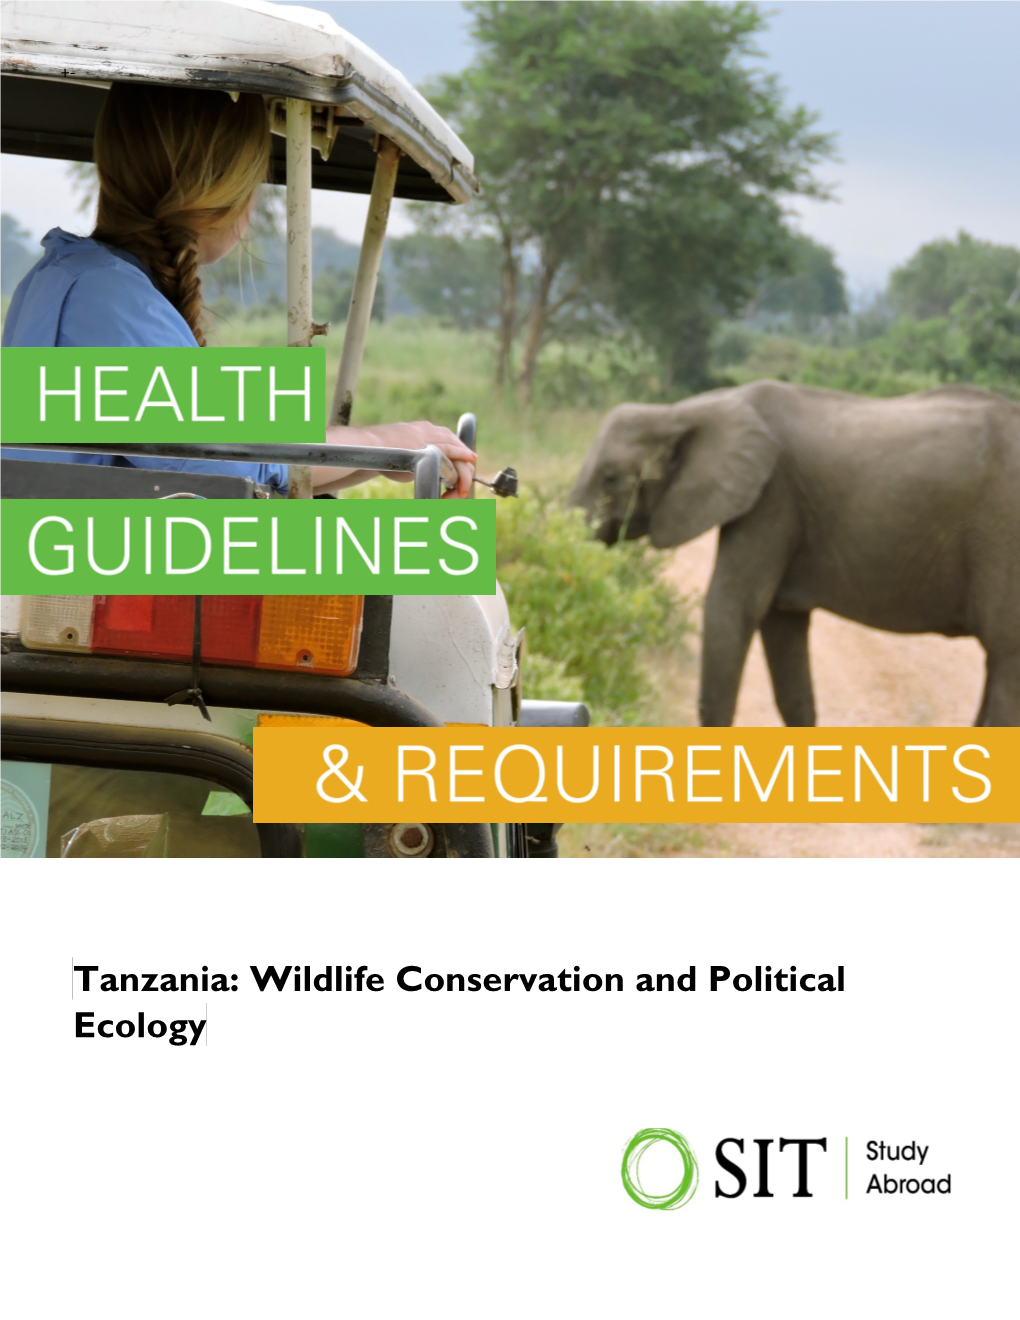 Tanzania: Wildlife Conservation and Political Ecology